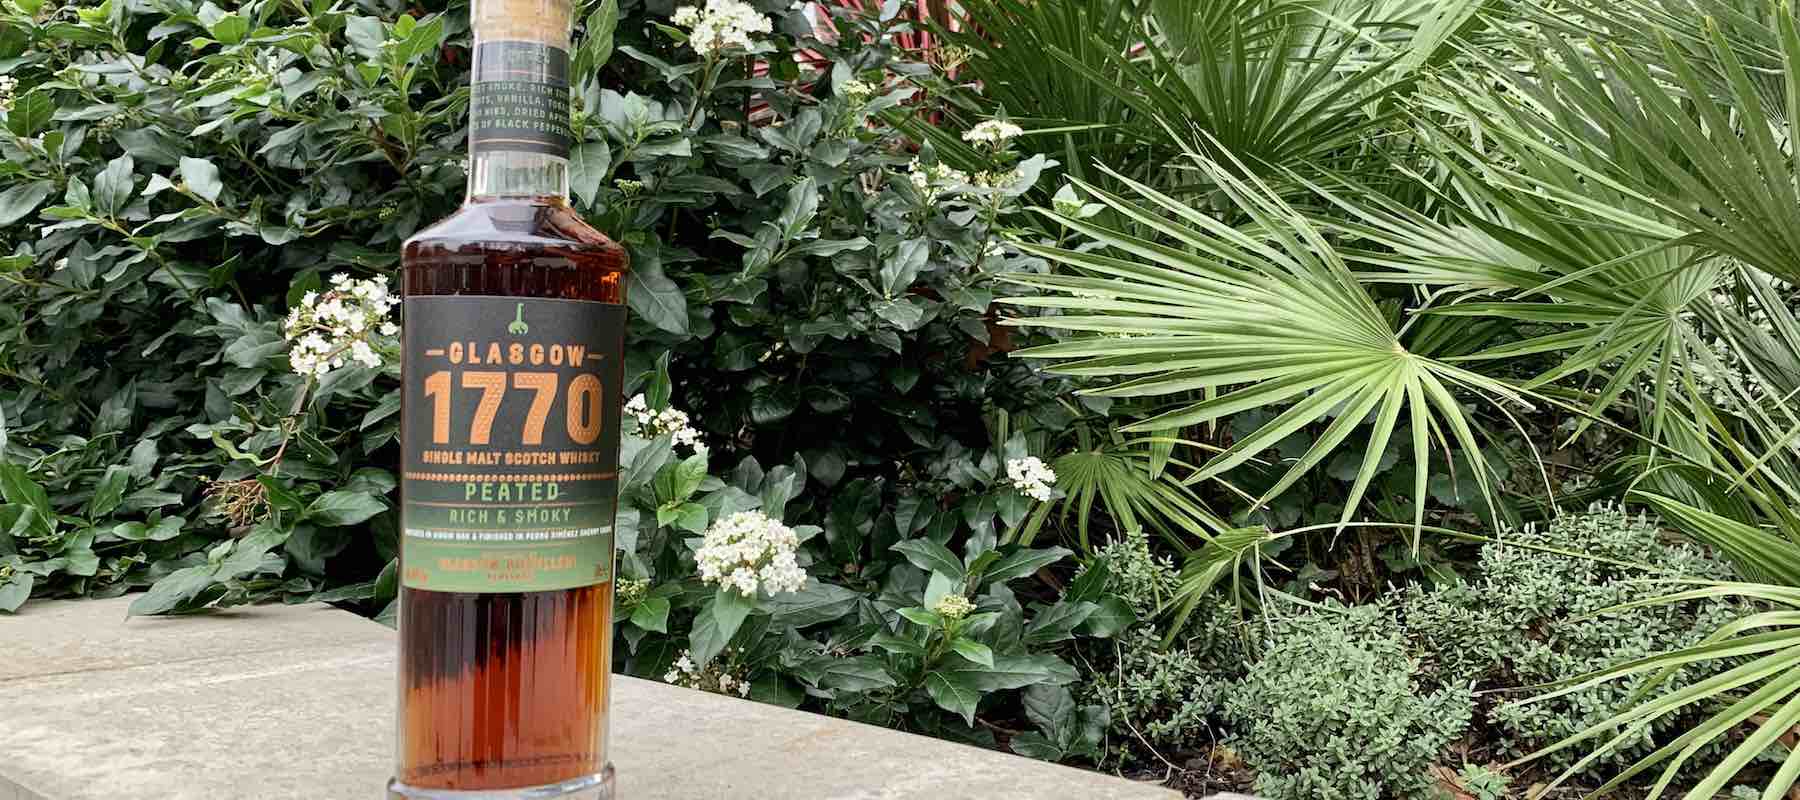 Whisky Under £50 Review 12: Glasgow 1770 Peated